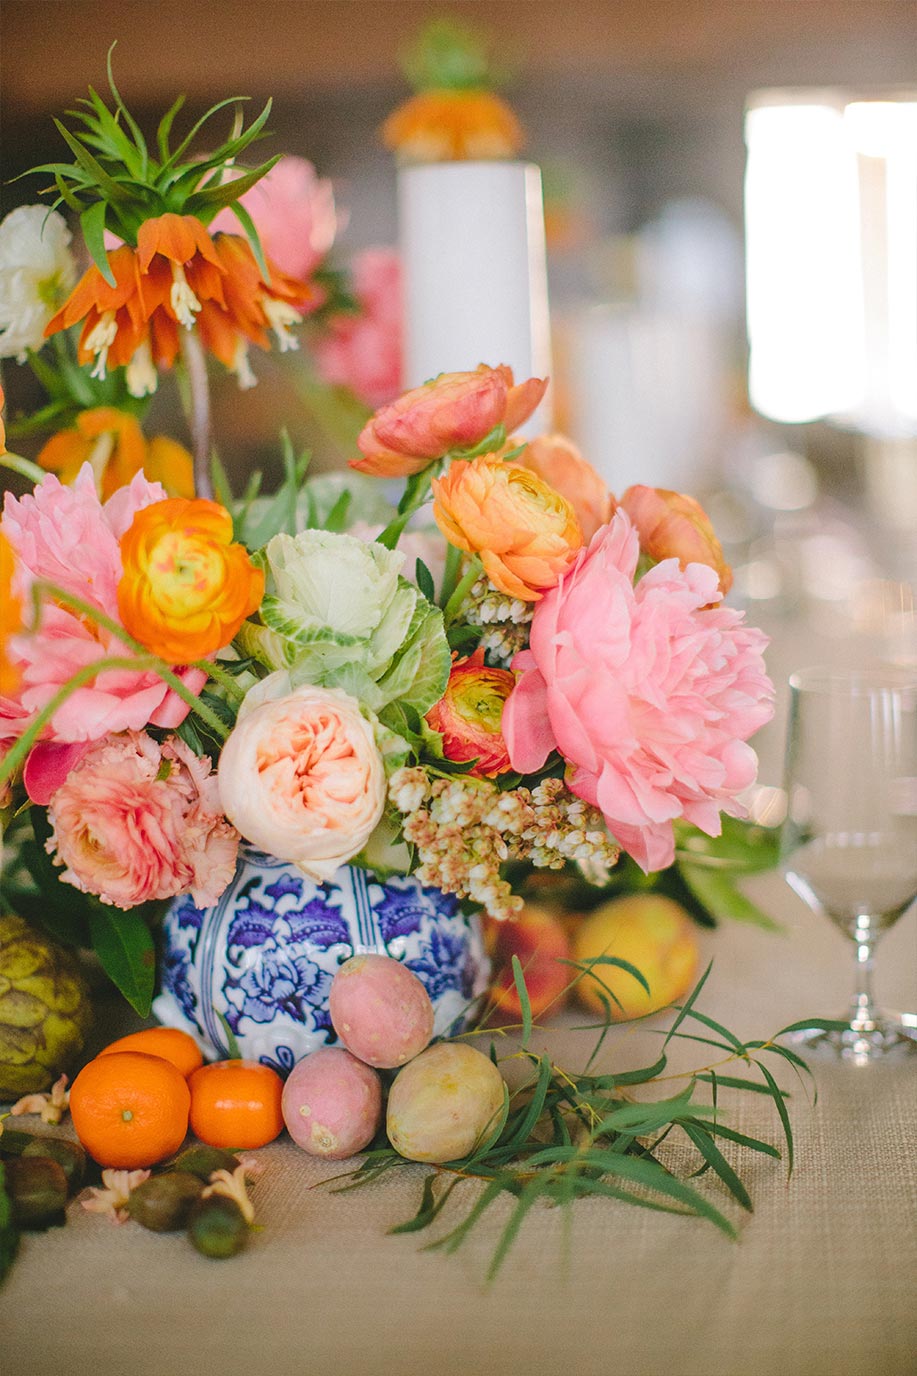 Pink and orange floral wedding centerpiece in blue and white porcelain vase with greenery and fruit